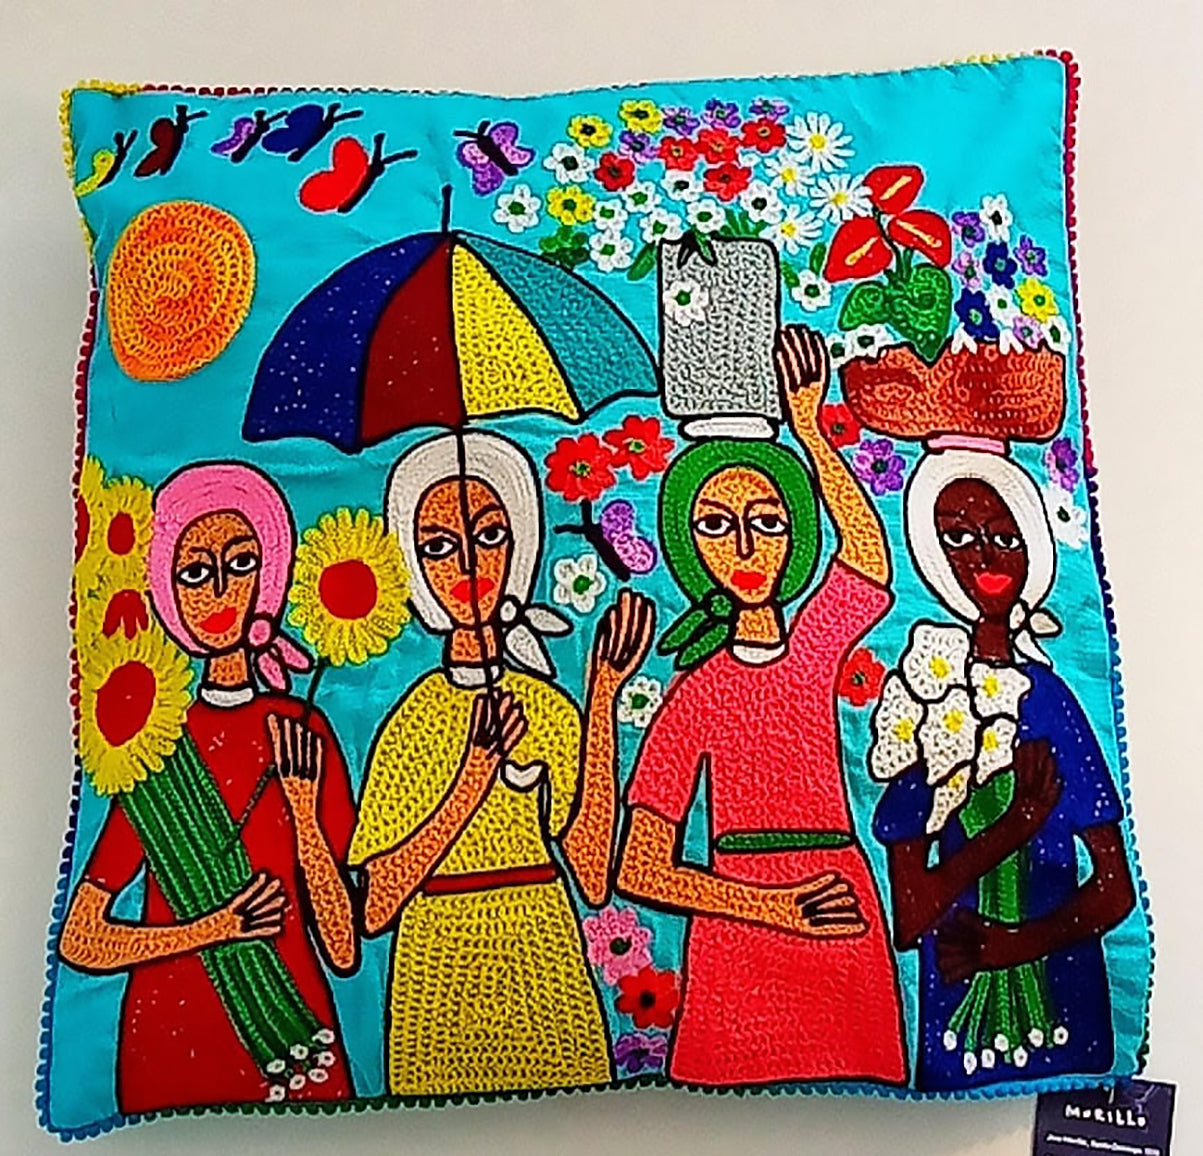 Jose Morillo 20"x20" Flower Sellers Hand Embroidery Cotton For Cushion #21JM-DR